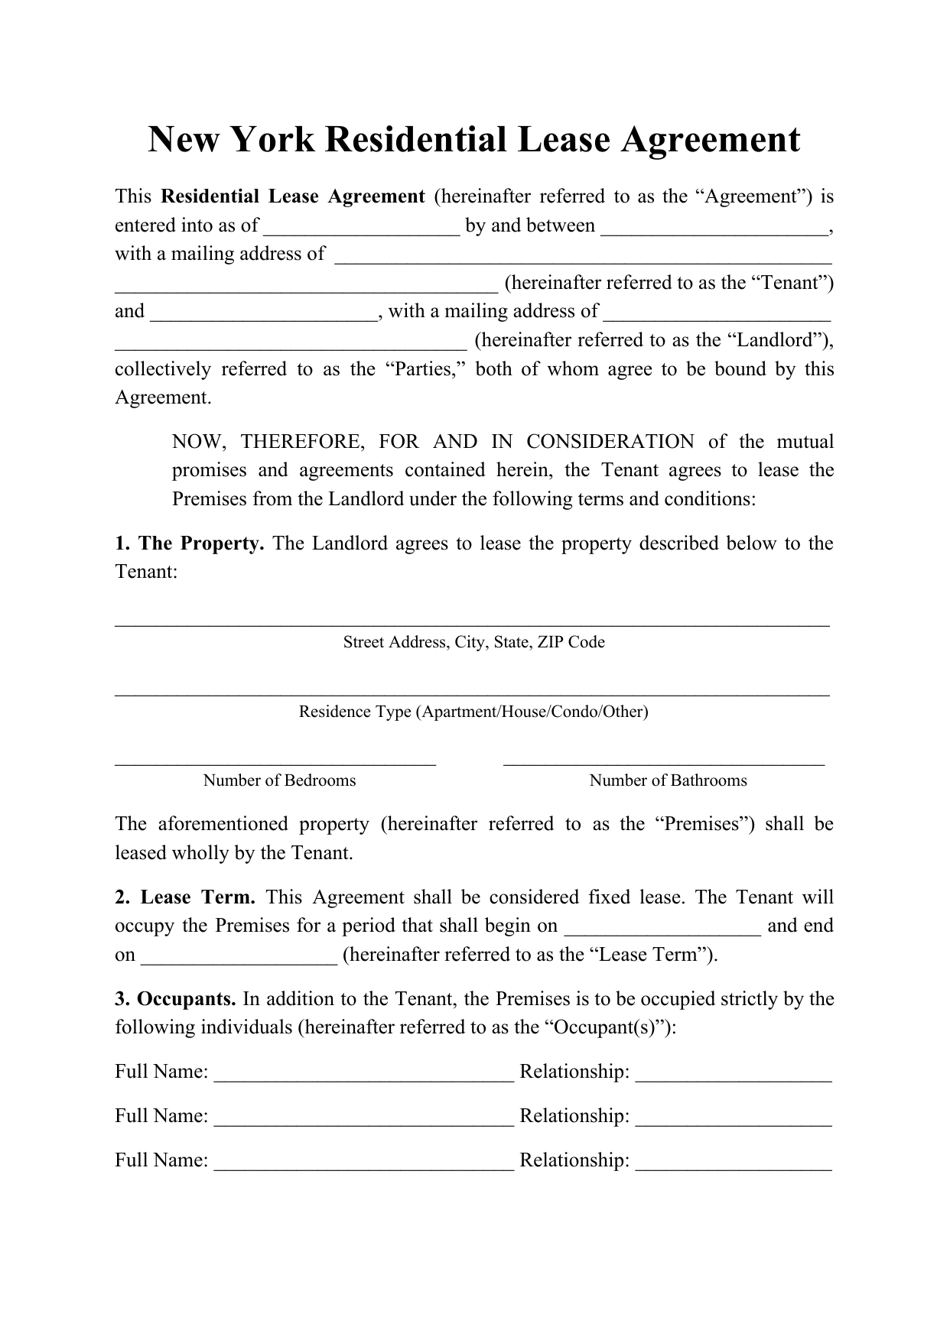 Residential Lease Agreement Template - New York, Page 1